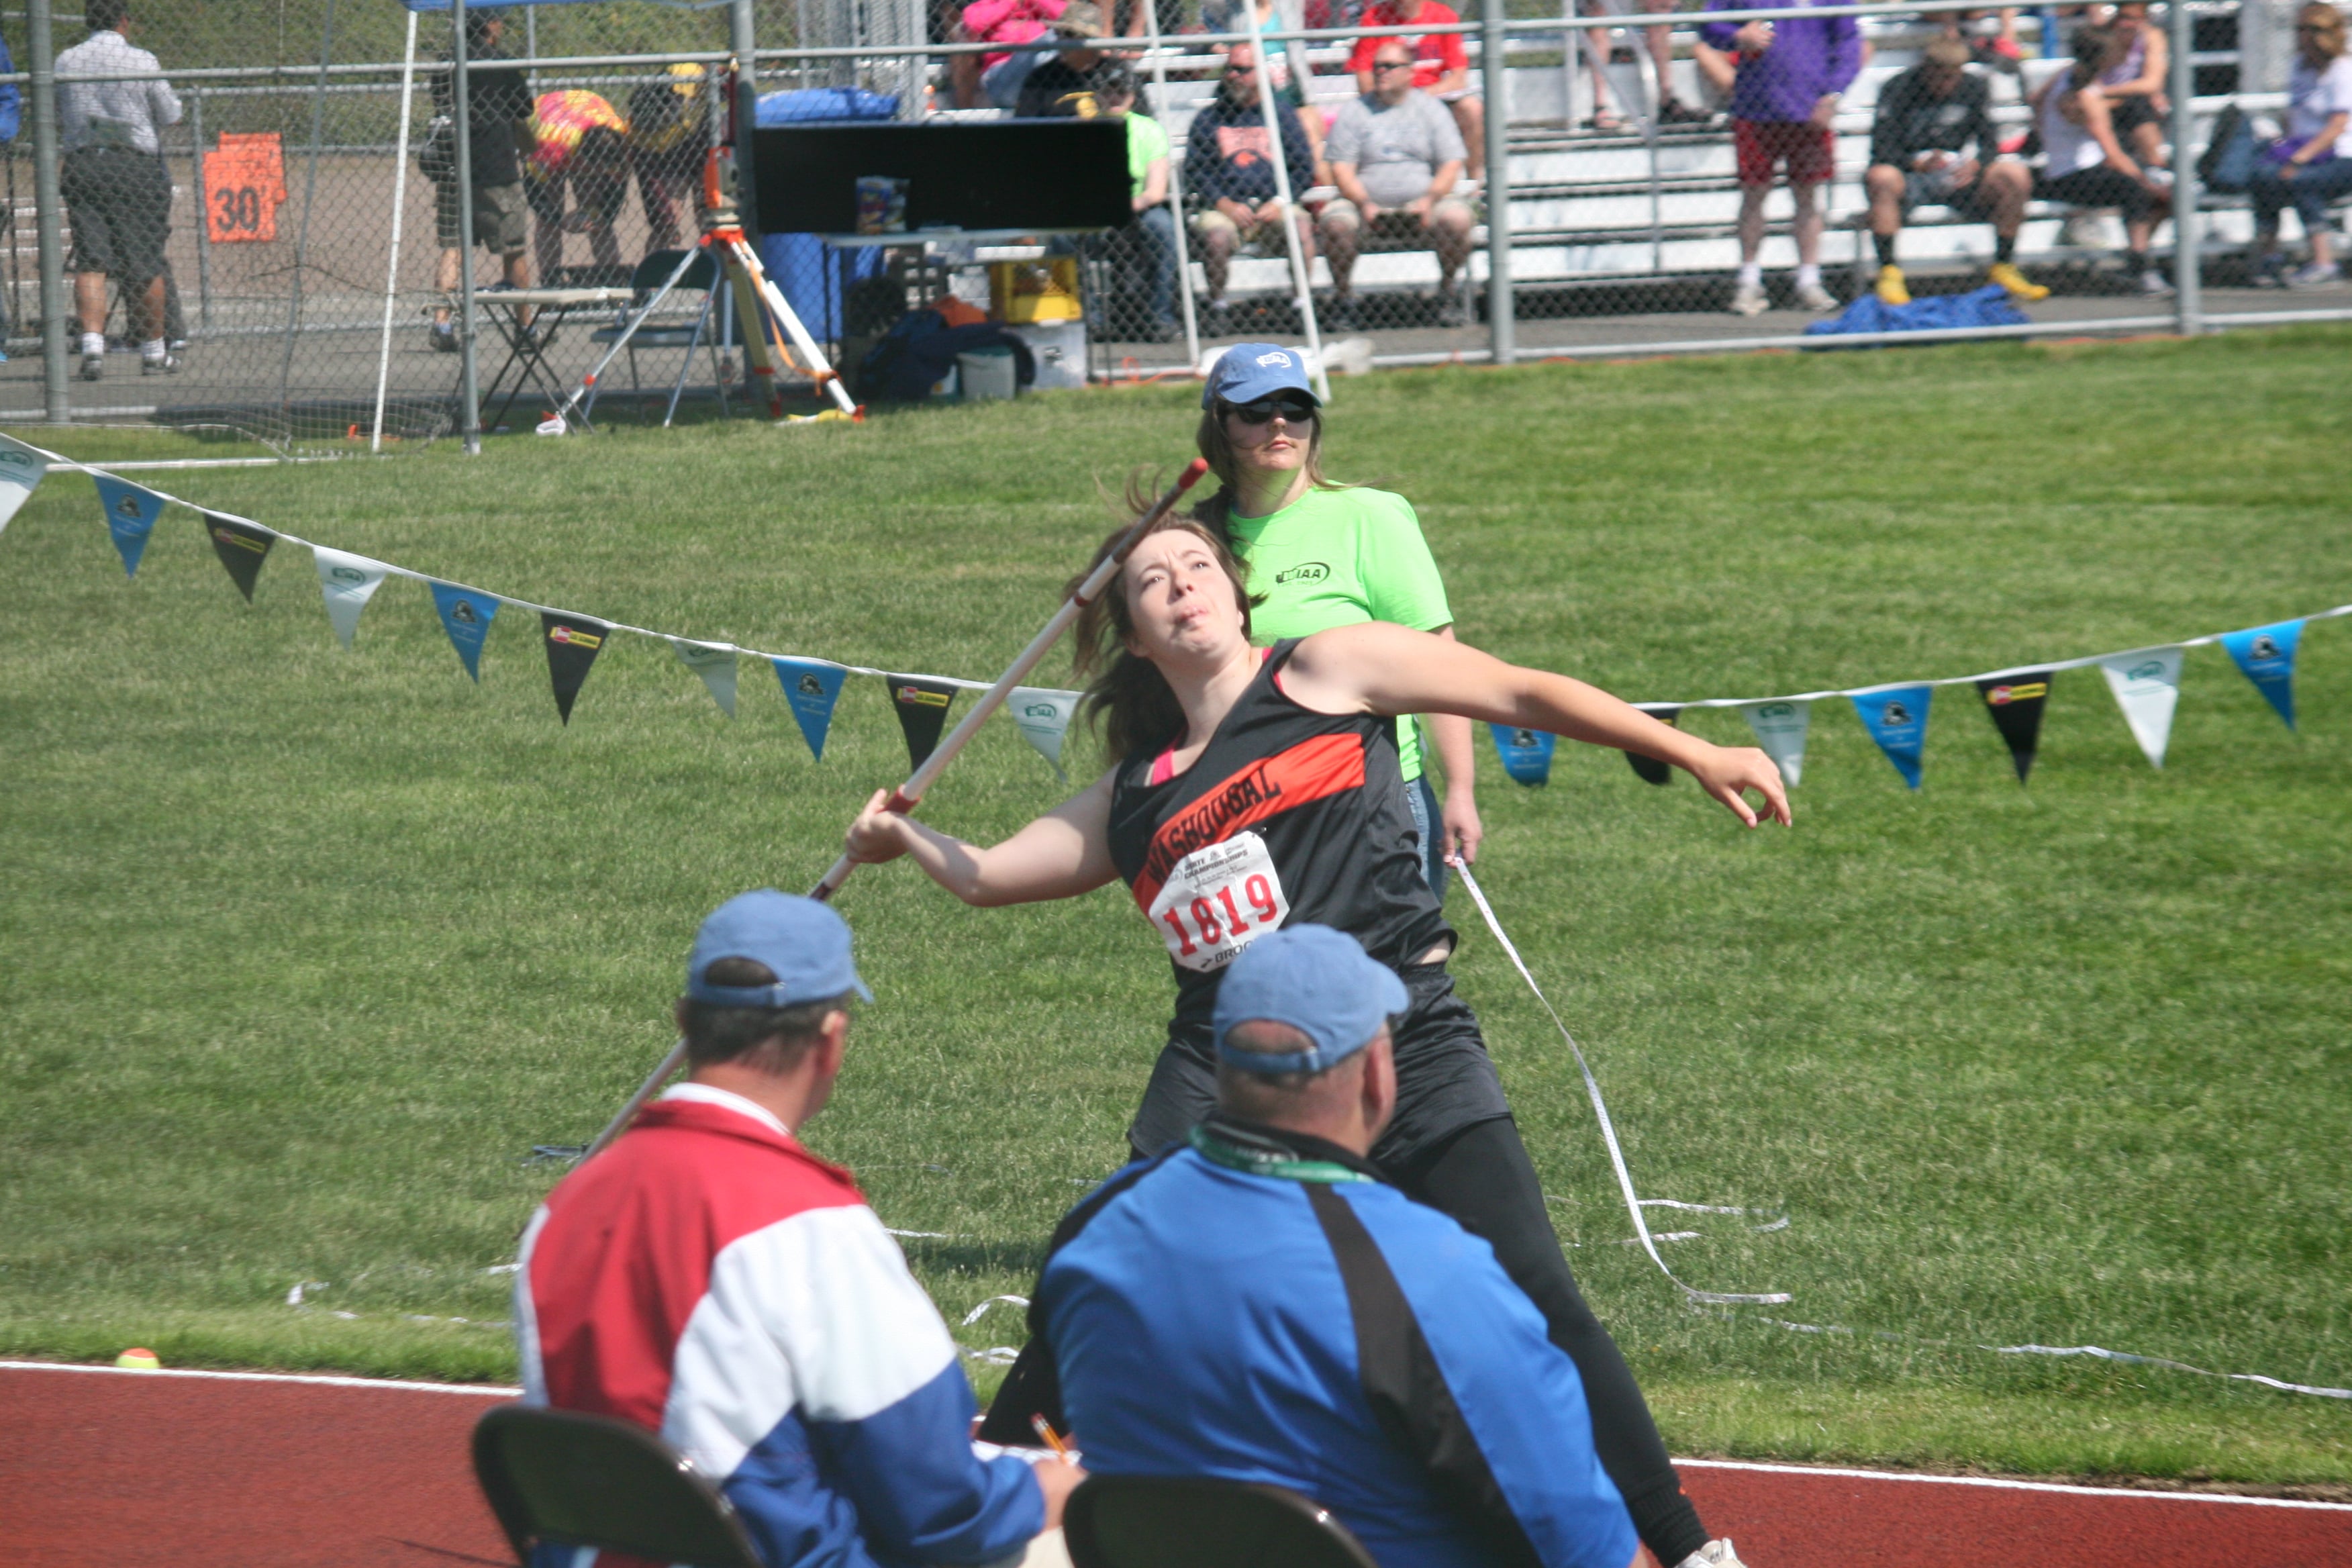 Mackenzie Pfeifer places fifth in the state javelin throw for Washougal.